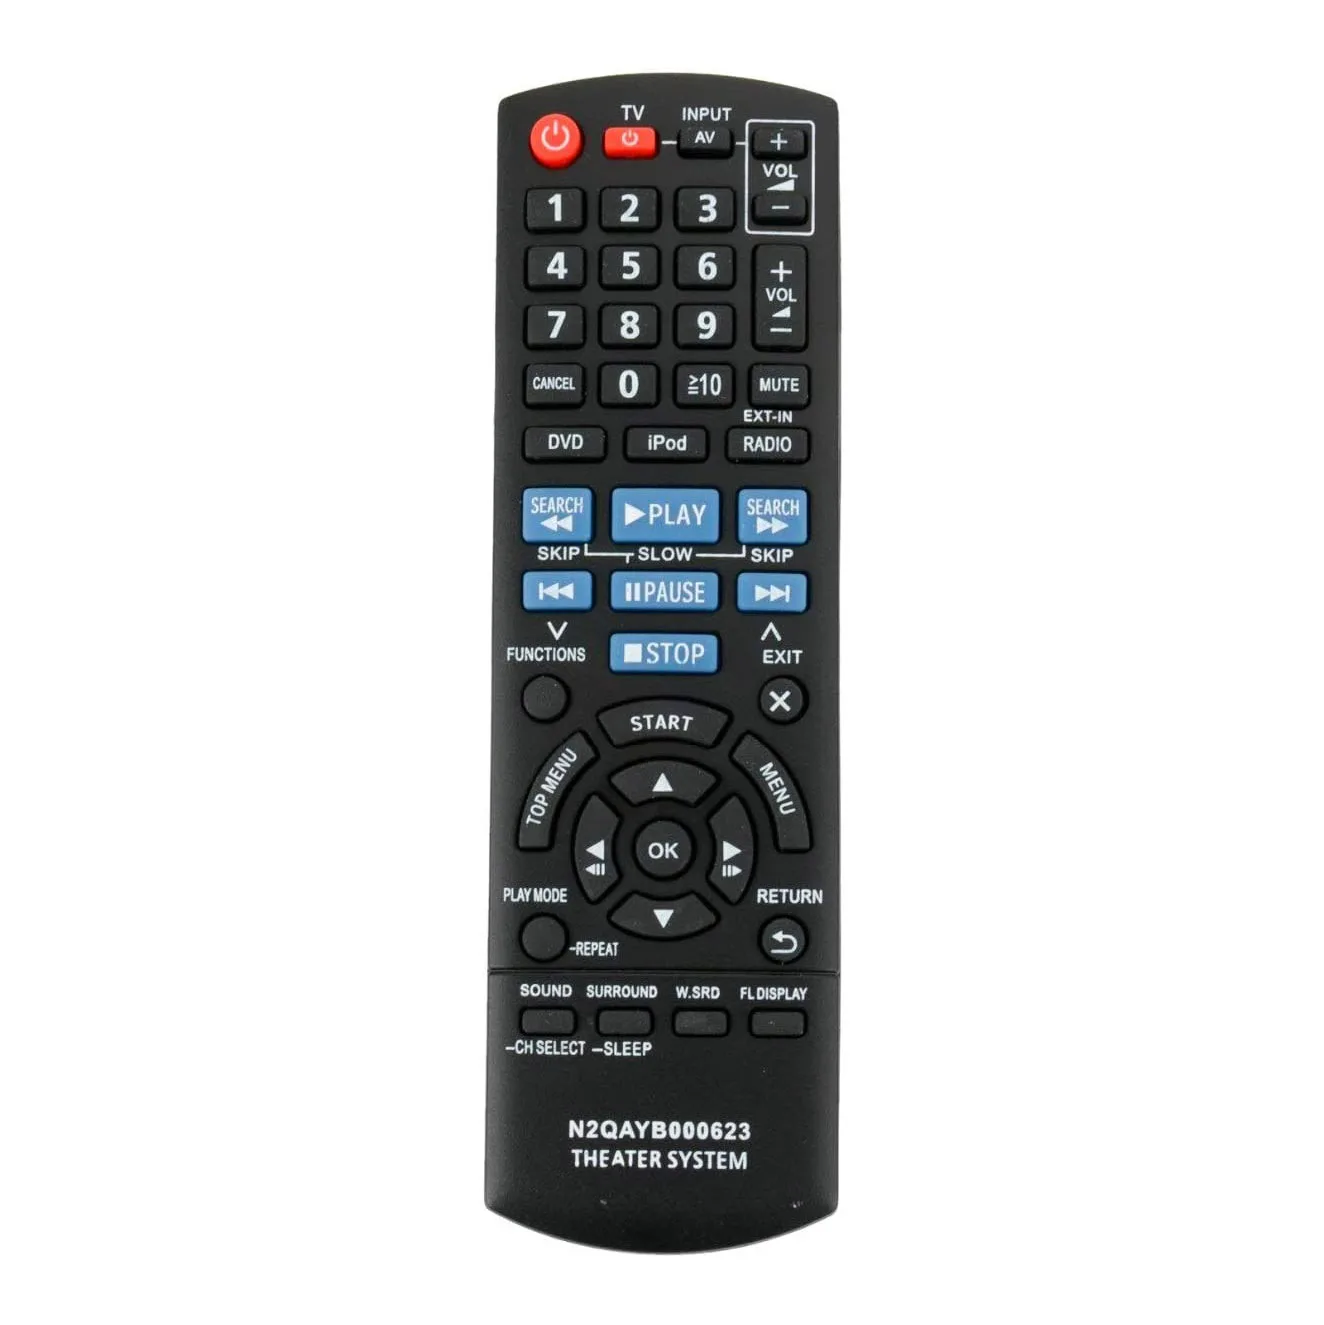 

New Replacement Remote Control for Panasonic Home Theater N2QAYB000623 SC-PT760 SA-PT940 Fernbedienung